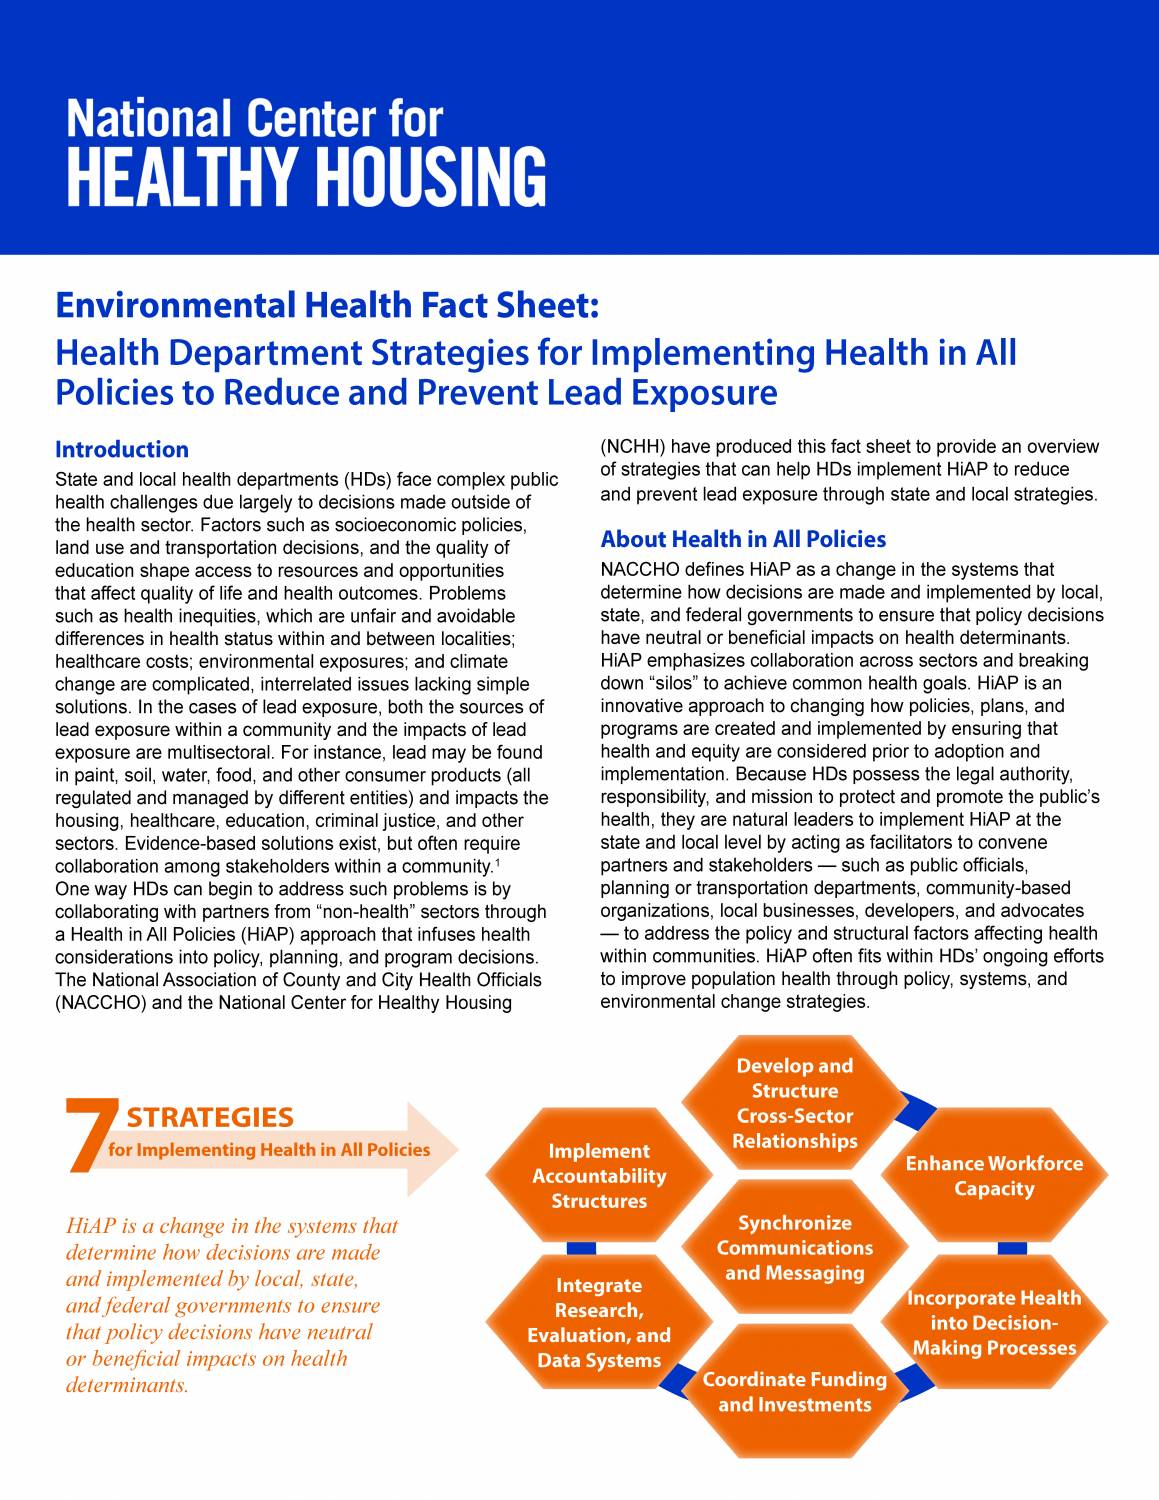 Health Department Strategies for Implementing Health in All Policies to Reduce and Prevent Lead Exposure